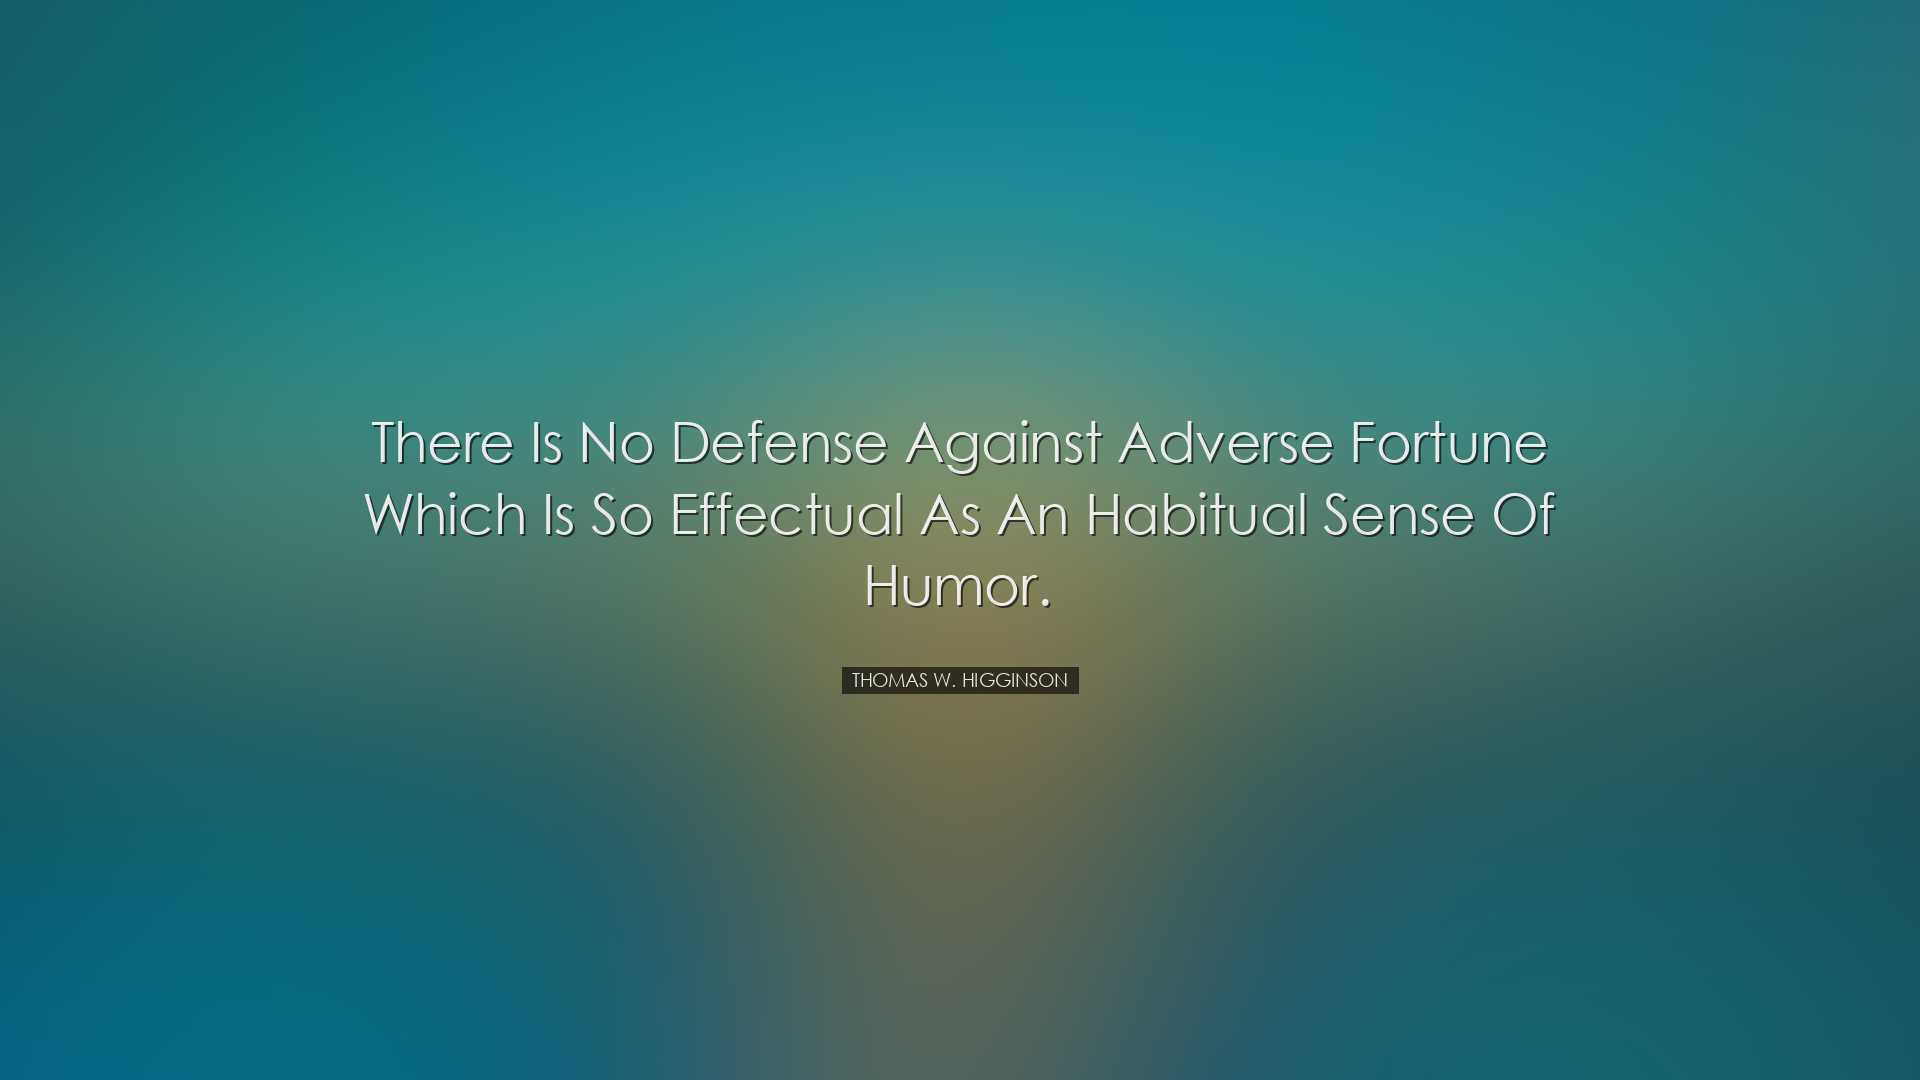 There is no defense against adverse fortune which is so effectual